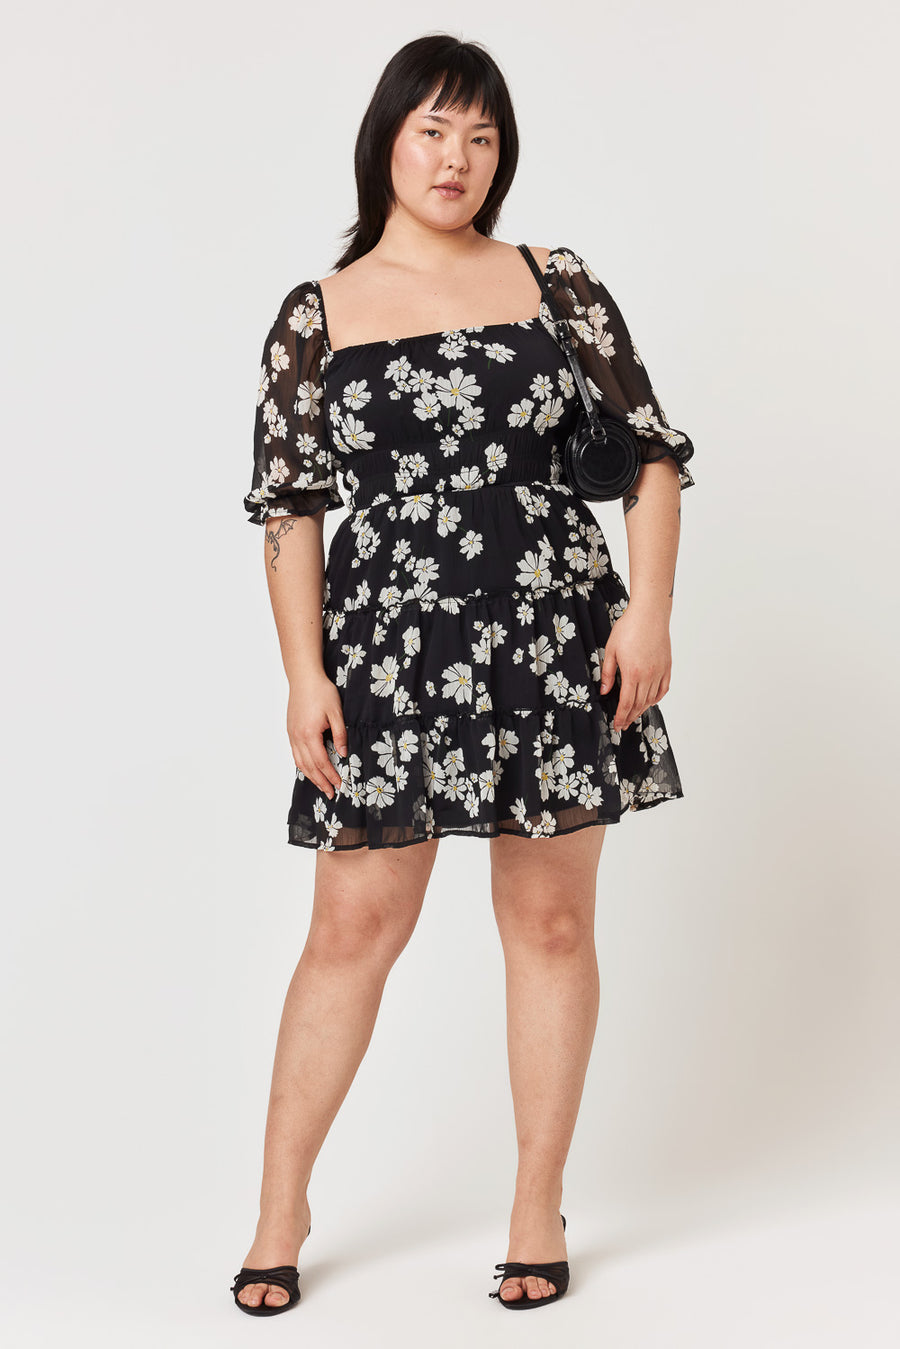 Black Floral Ruched Waist Tier Dress - Trixxi Clothing